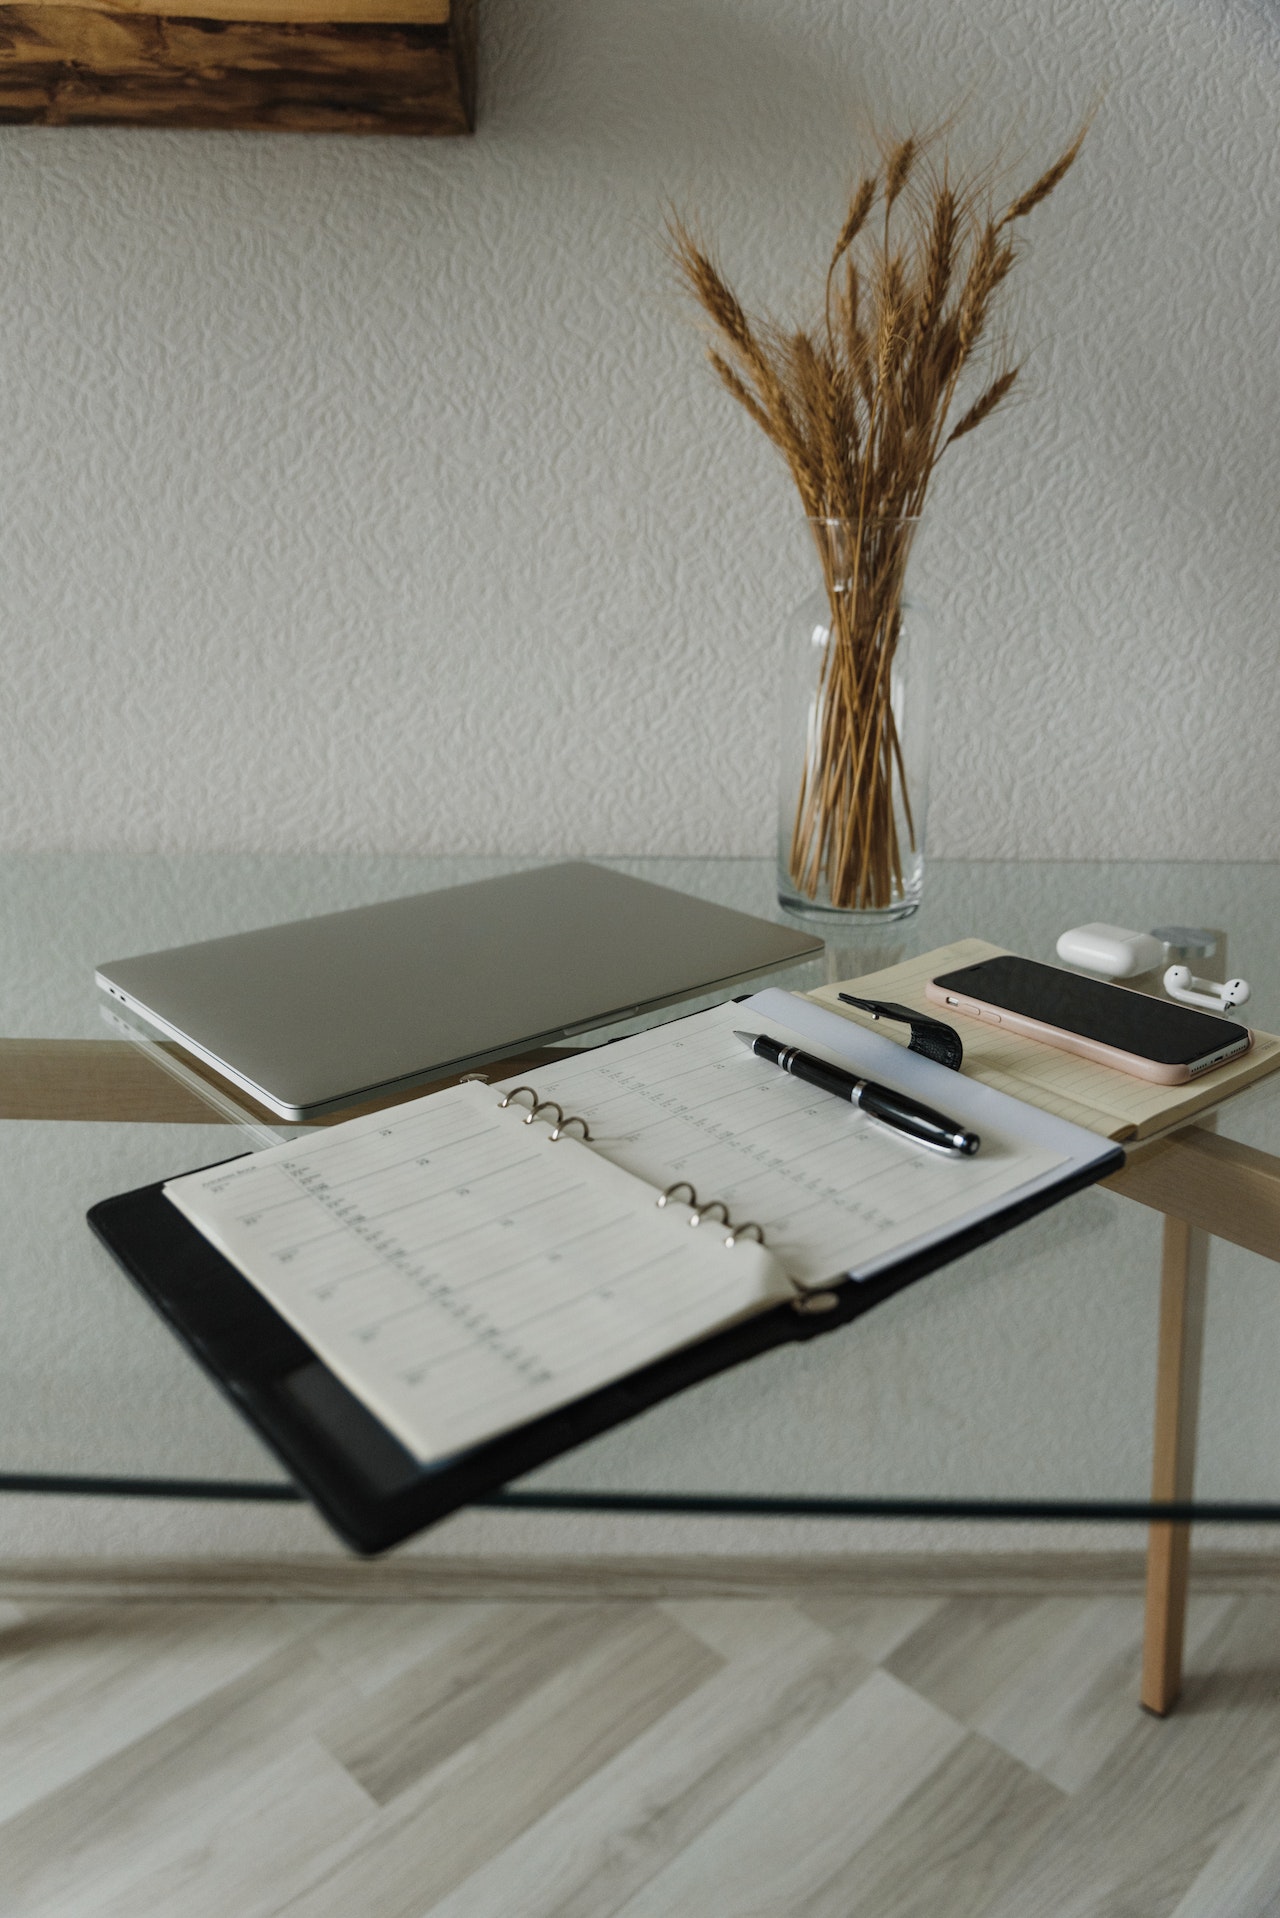 A notepad lays open on a glass table. There is also a macbook, phone, pens.